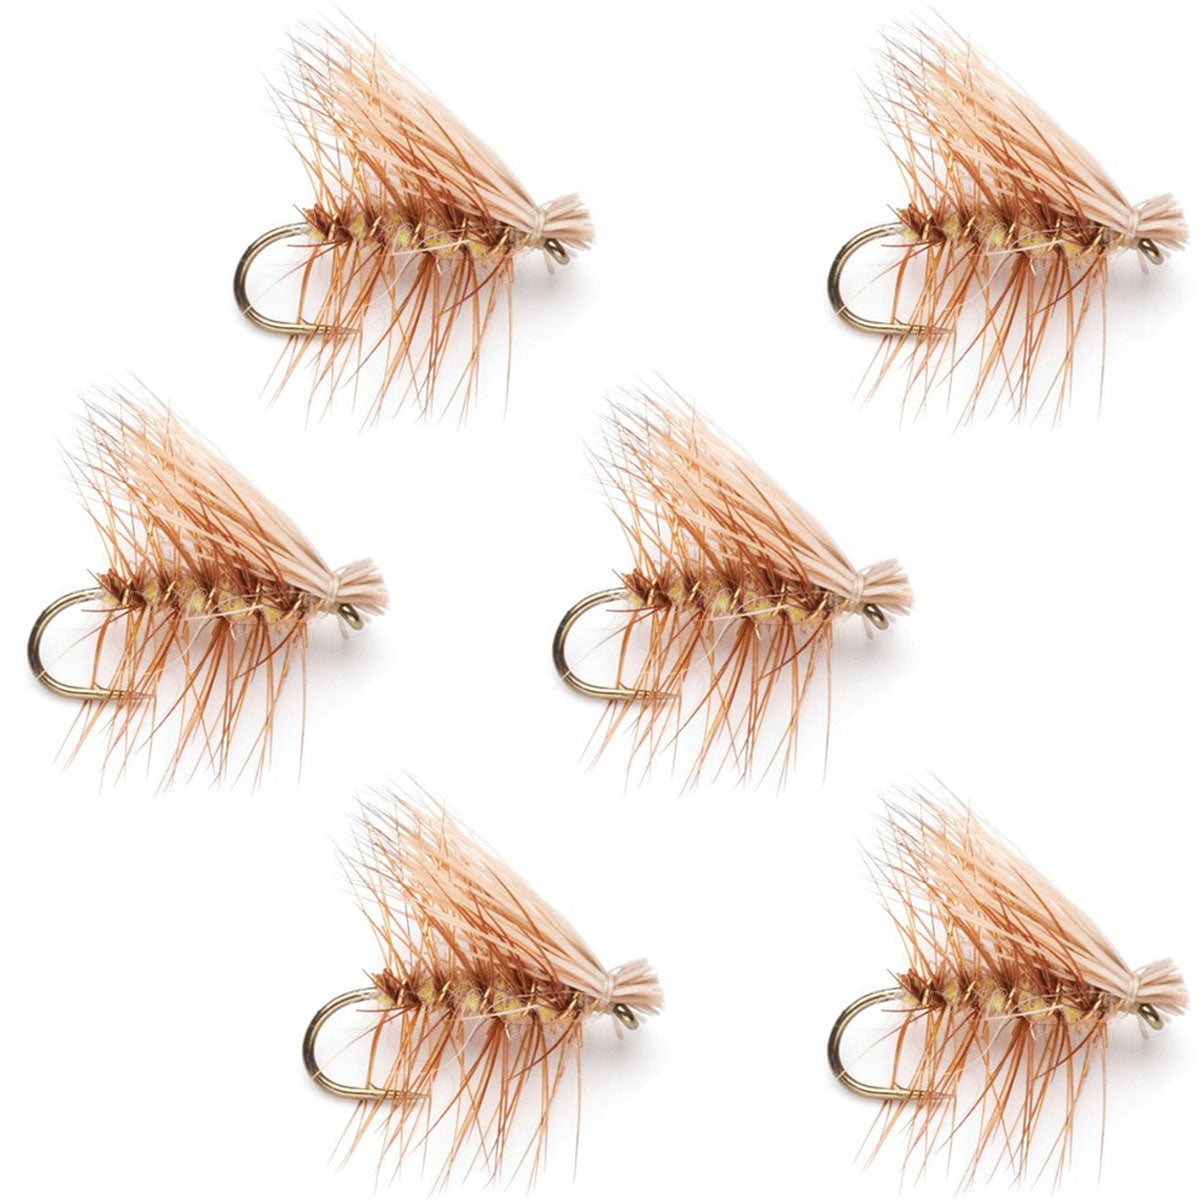 Yellow Elk Hair Caddis Classic Trout Dry Fly - Set of 6 Flies Size 18